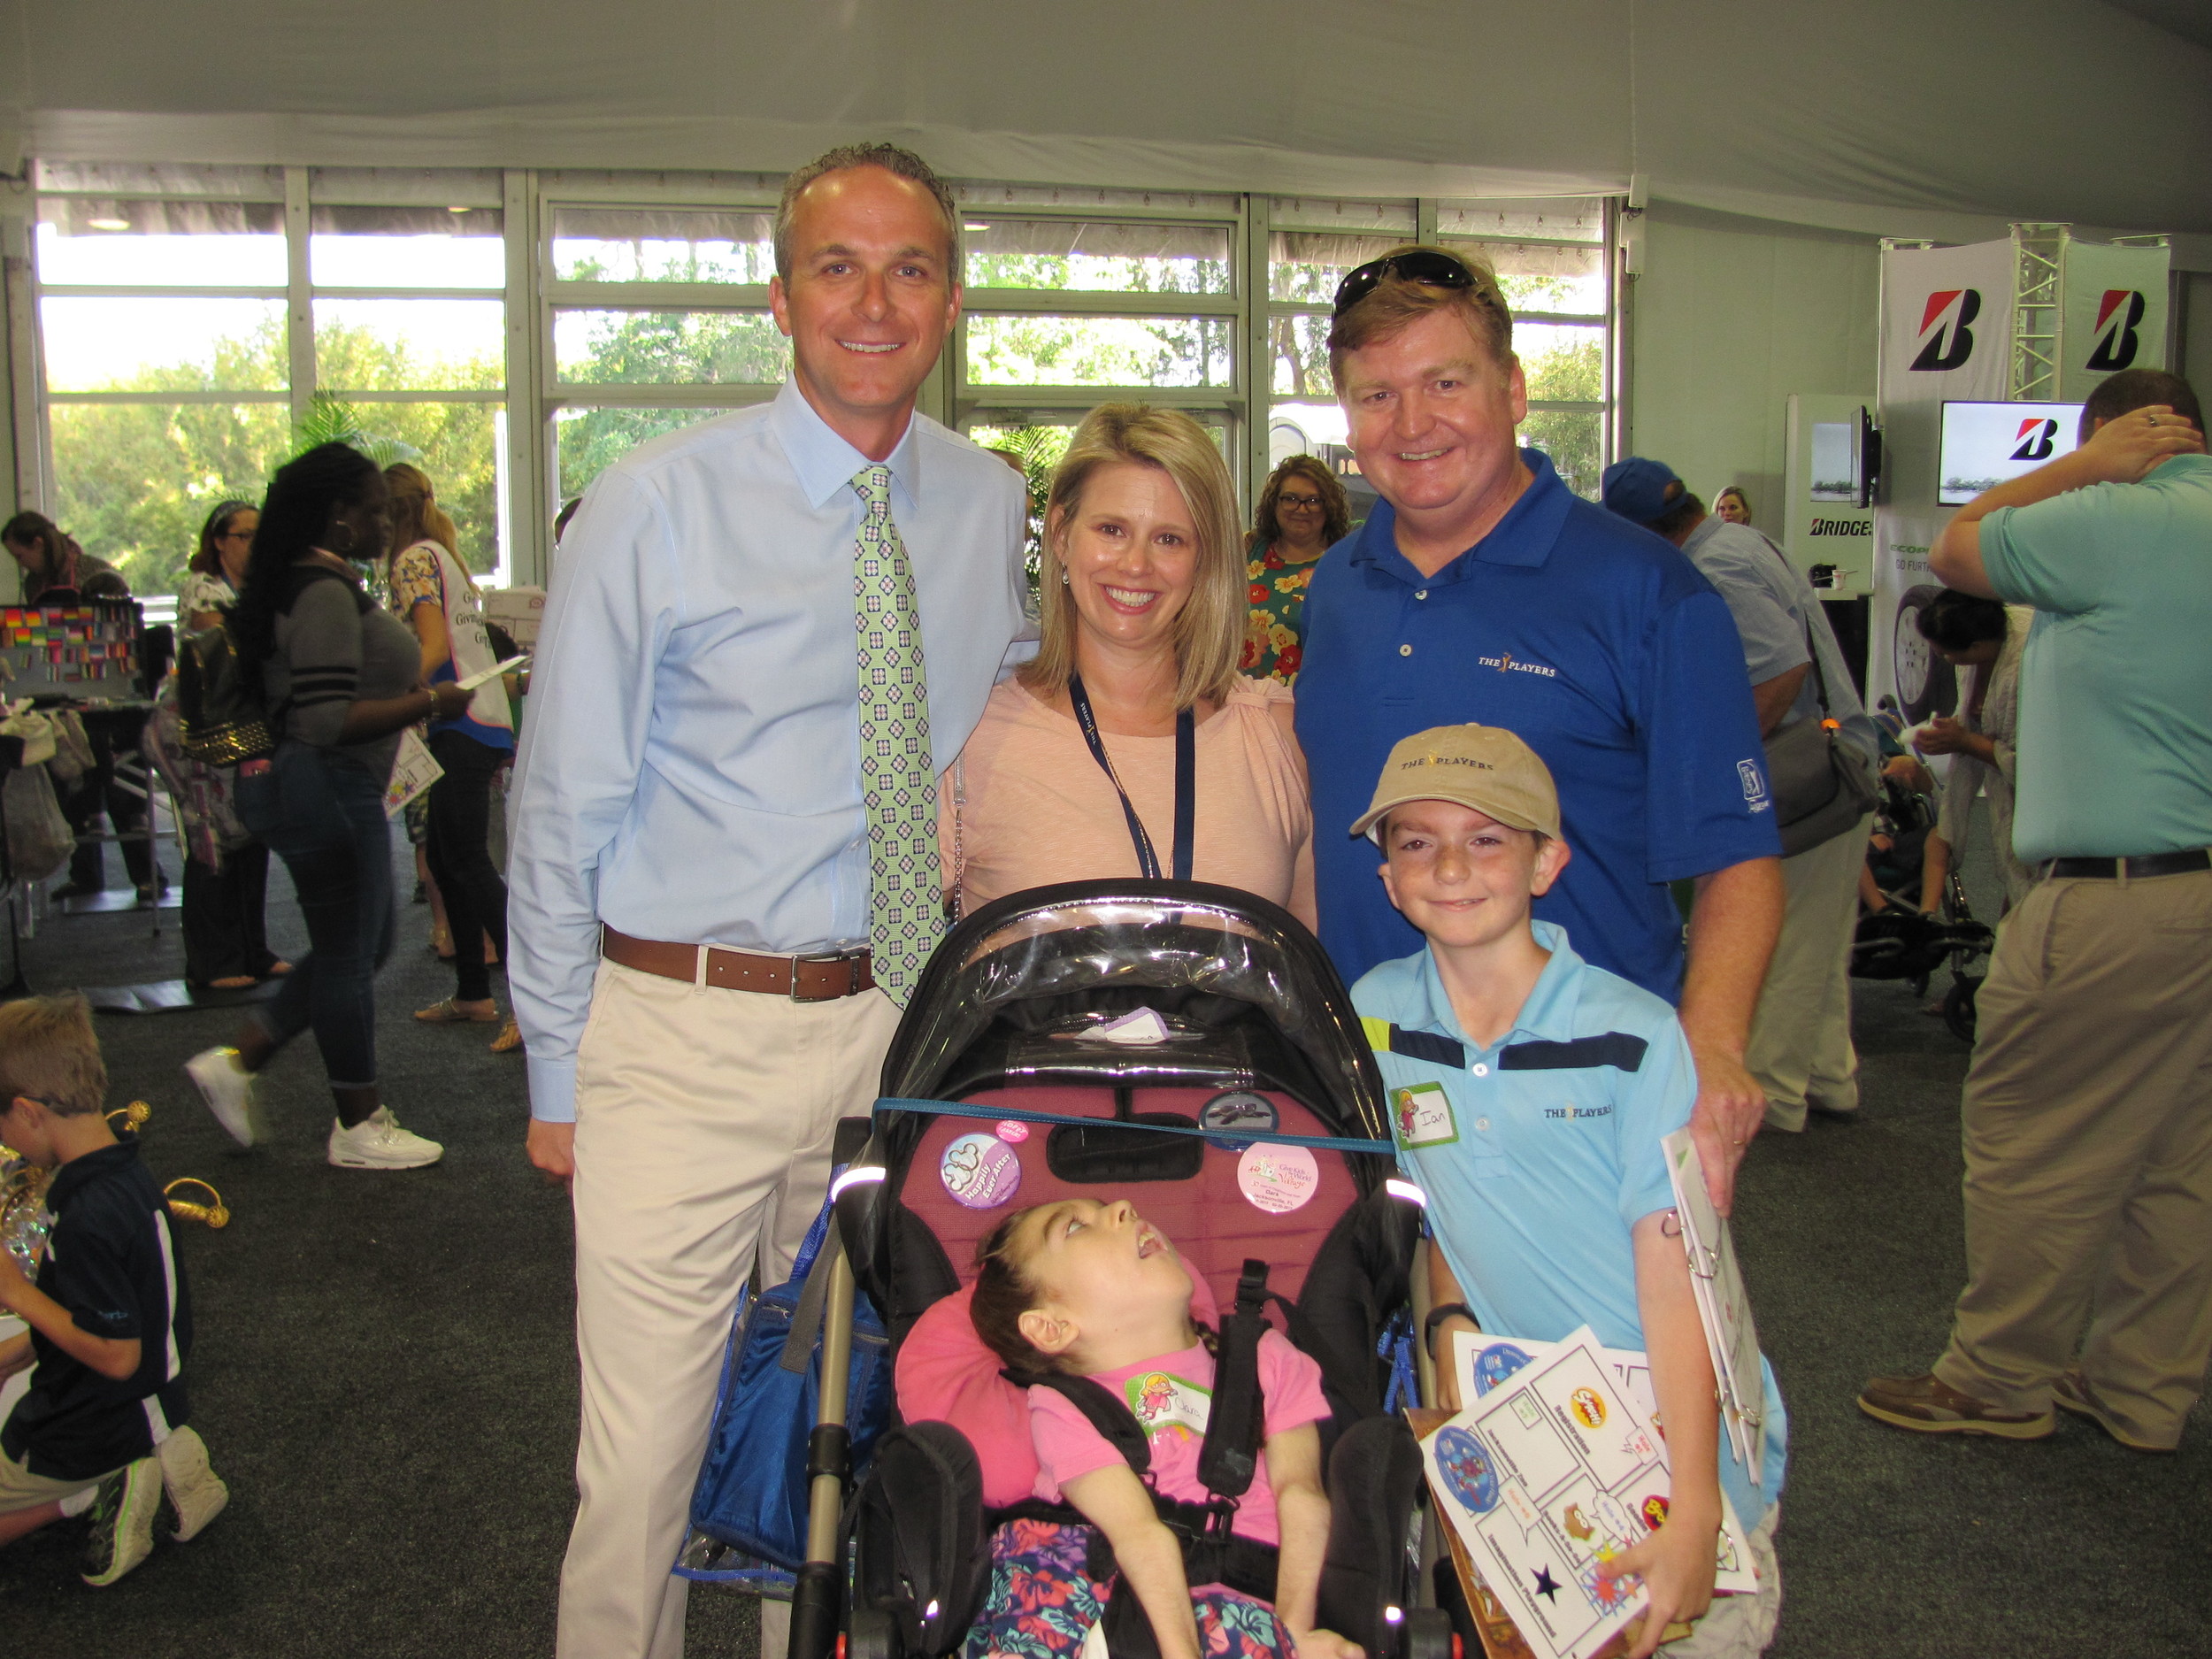 THE PLAYERS Championship Executive Director Jared Rice and his wife Sheila come together with a family from Community PedsCare at “These Kids Can Play.”